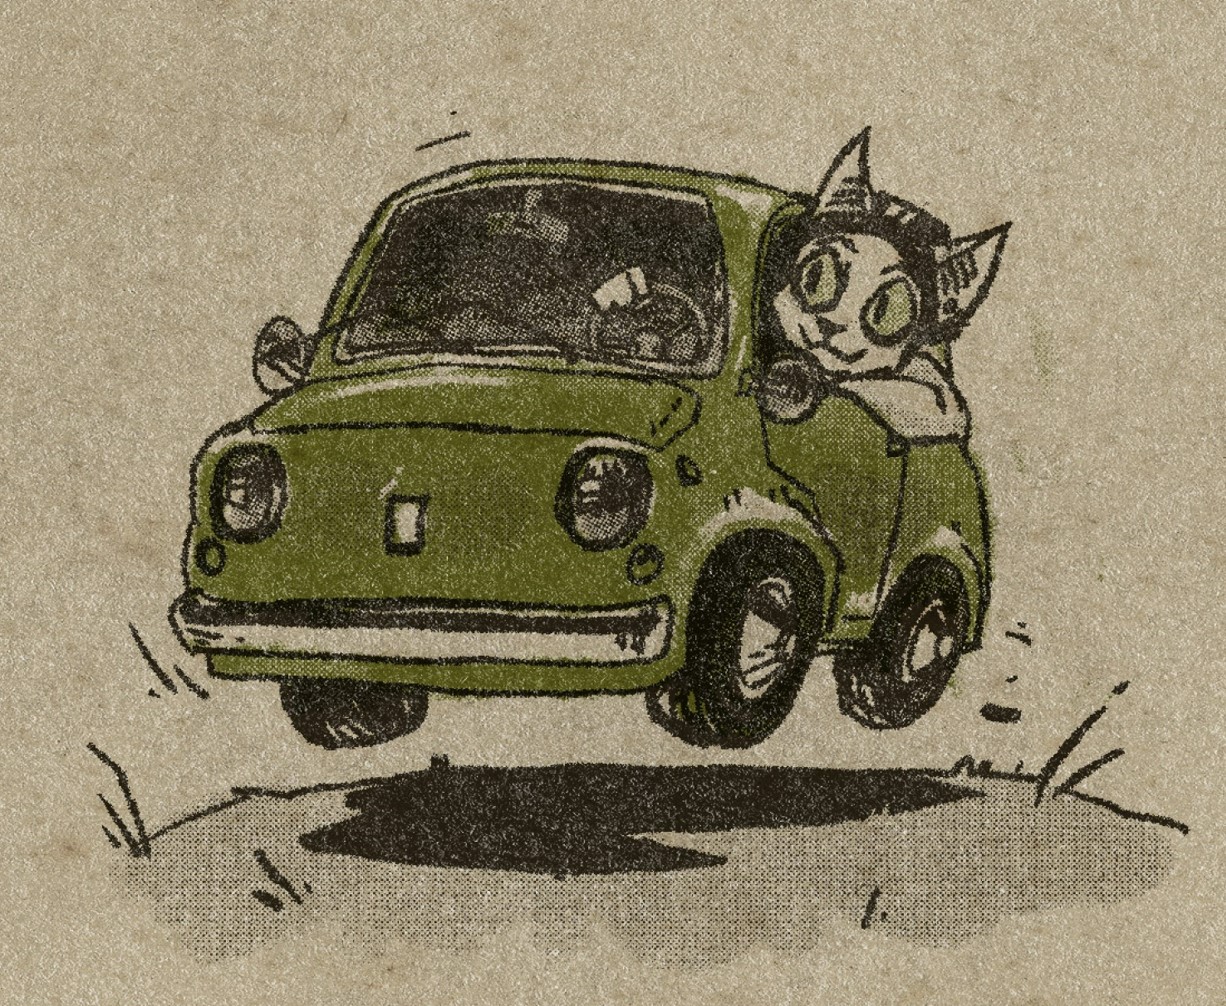 An old green Fiat car zooming so fast it flies off the ground. A cat character with a beanie hat hangs out the window with a happy expression.